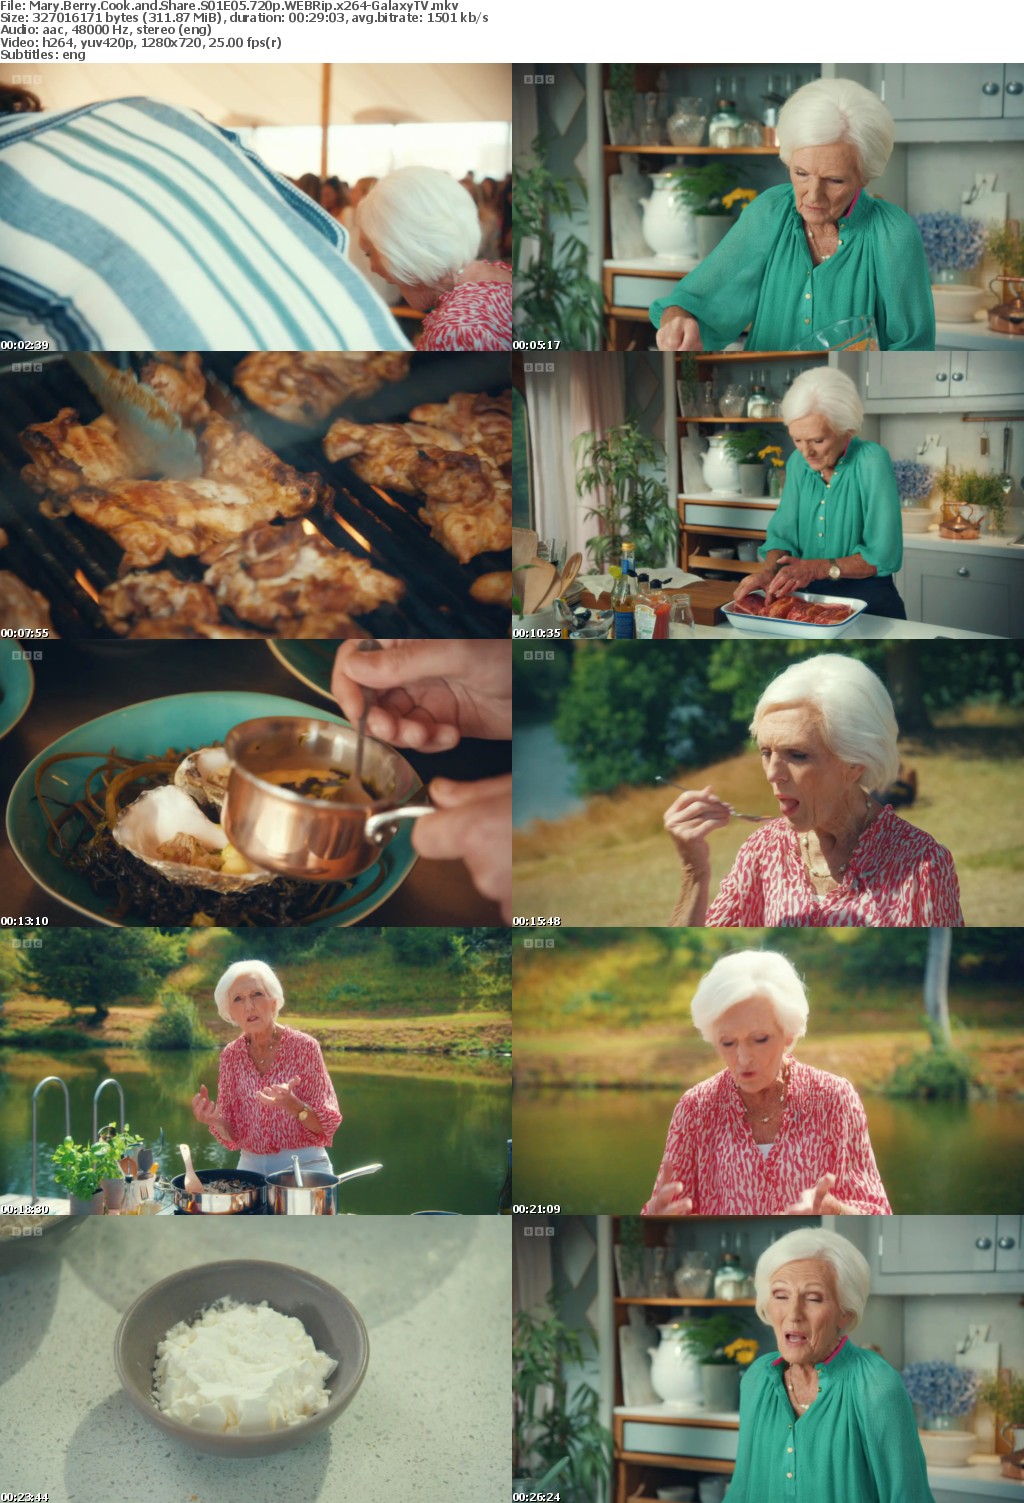 Mary Berry Cook and Share S01 COMPLETE 720p WEBRip x264-GalaxyTV